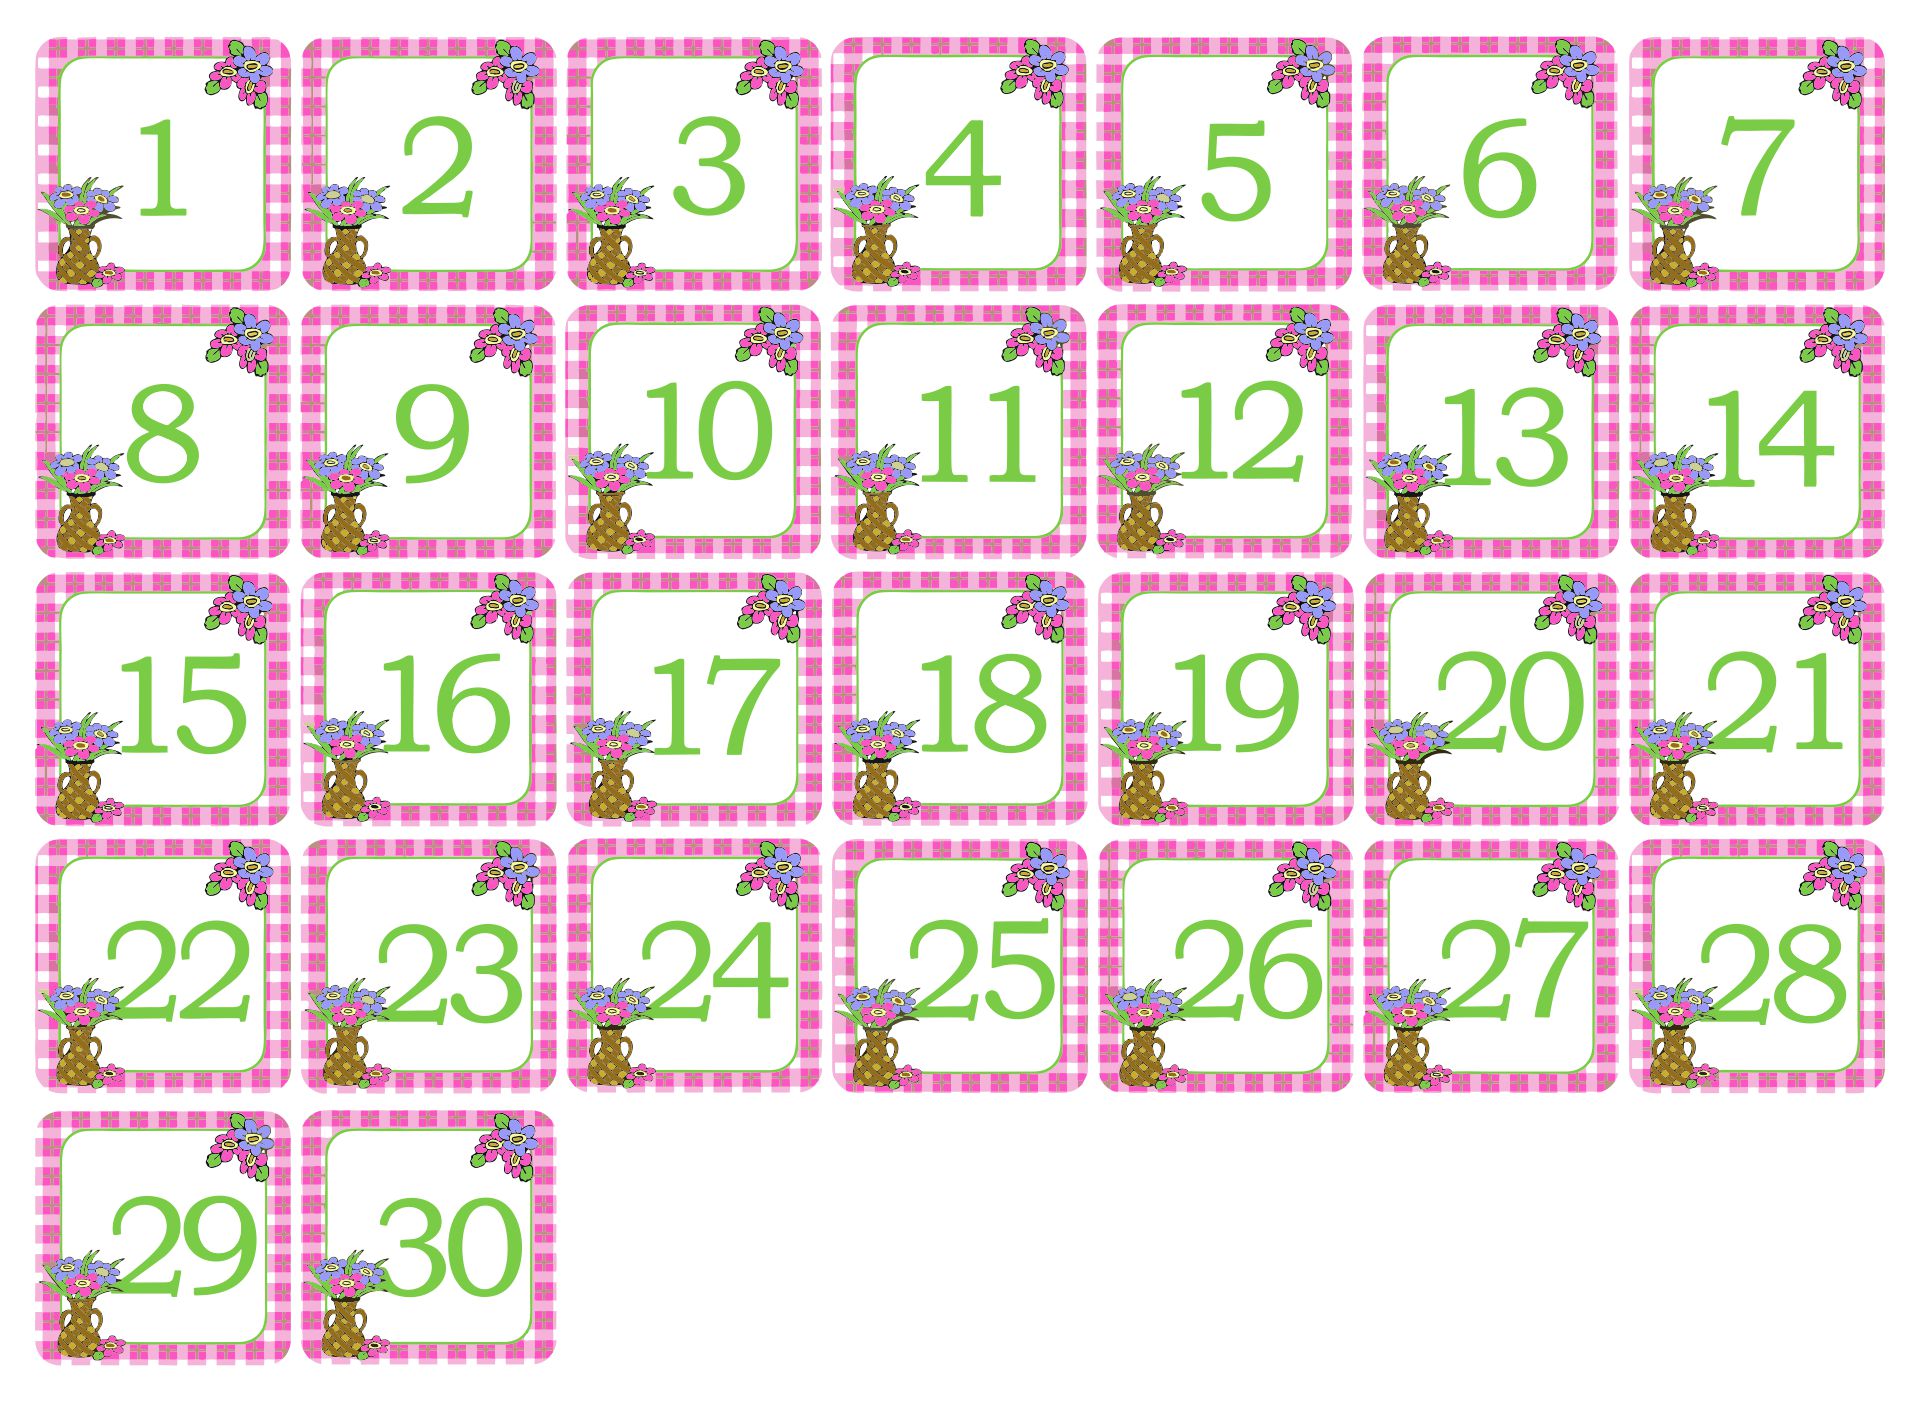 Free Printable Calendar Numbers For Pocket Chart